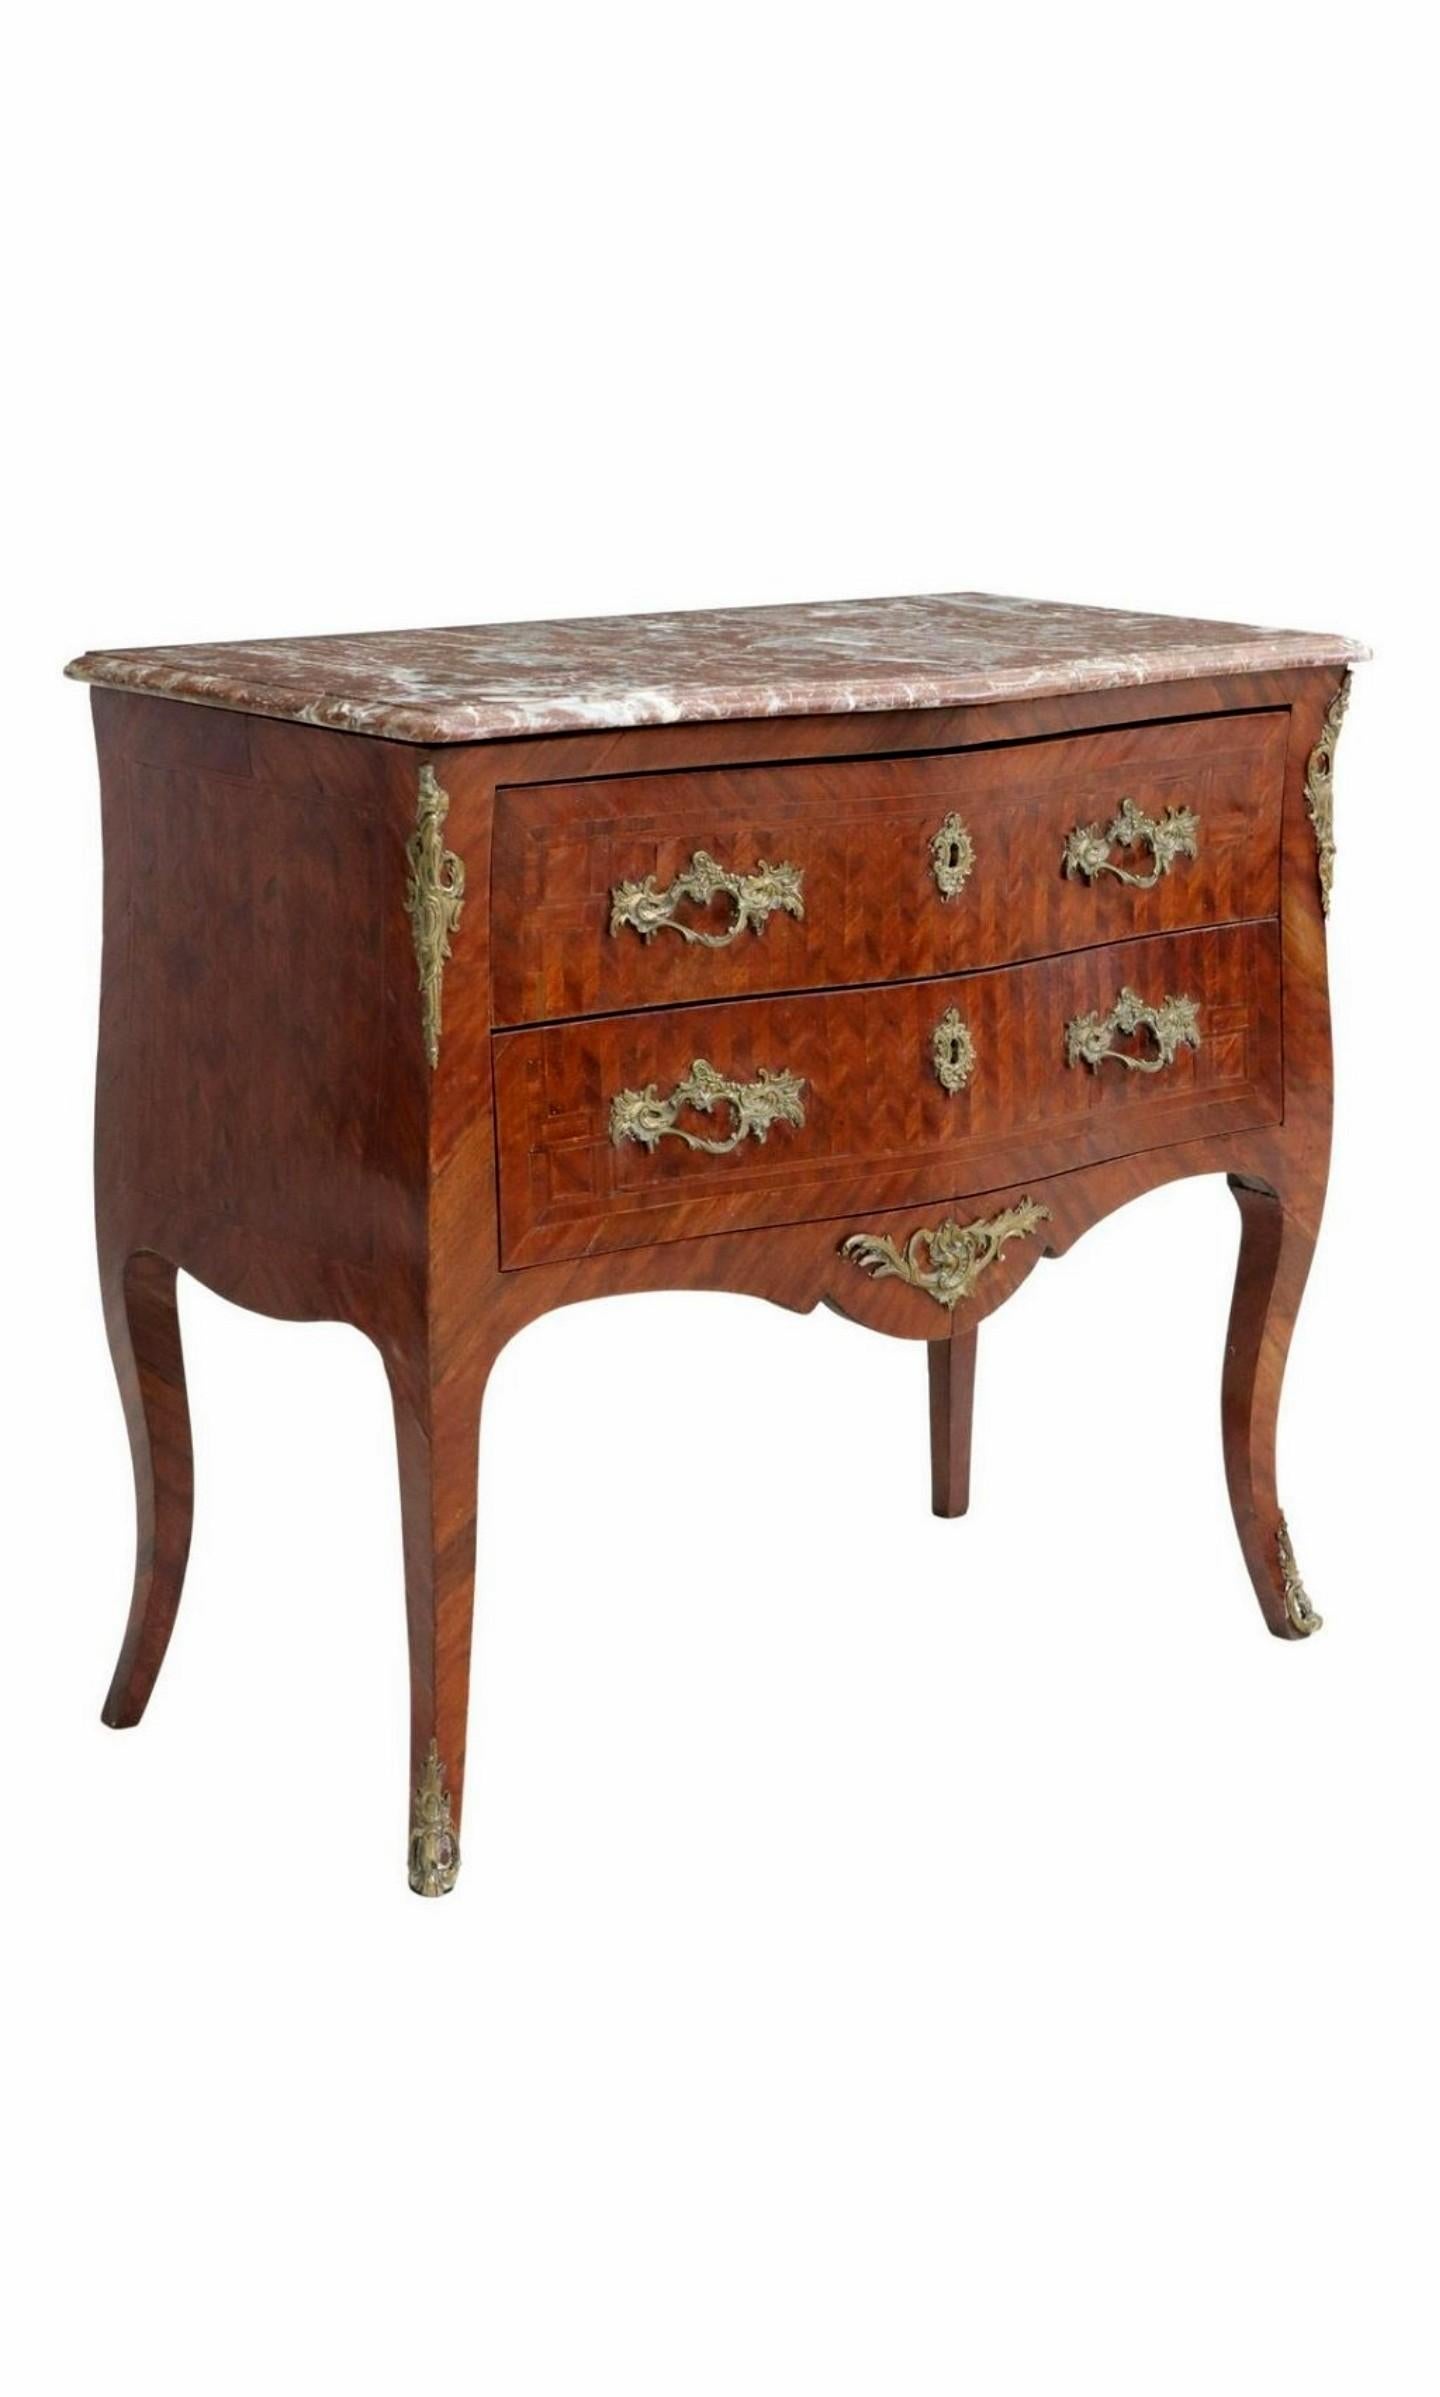 Elegant and sophisticated antique French Louis XV style kingwood parquetry marble-top commode sauteuse. 

Born in France in the 19th century, exquisitely hand-crafted in luxurious 18th century King Louis 15th taste, retaining the original